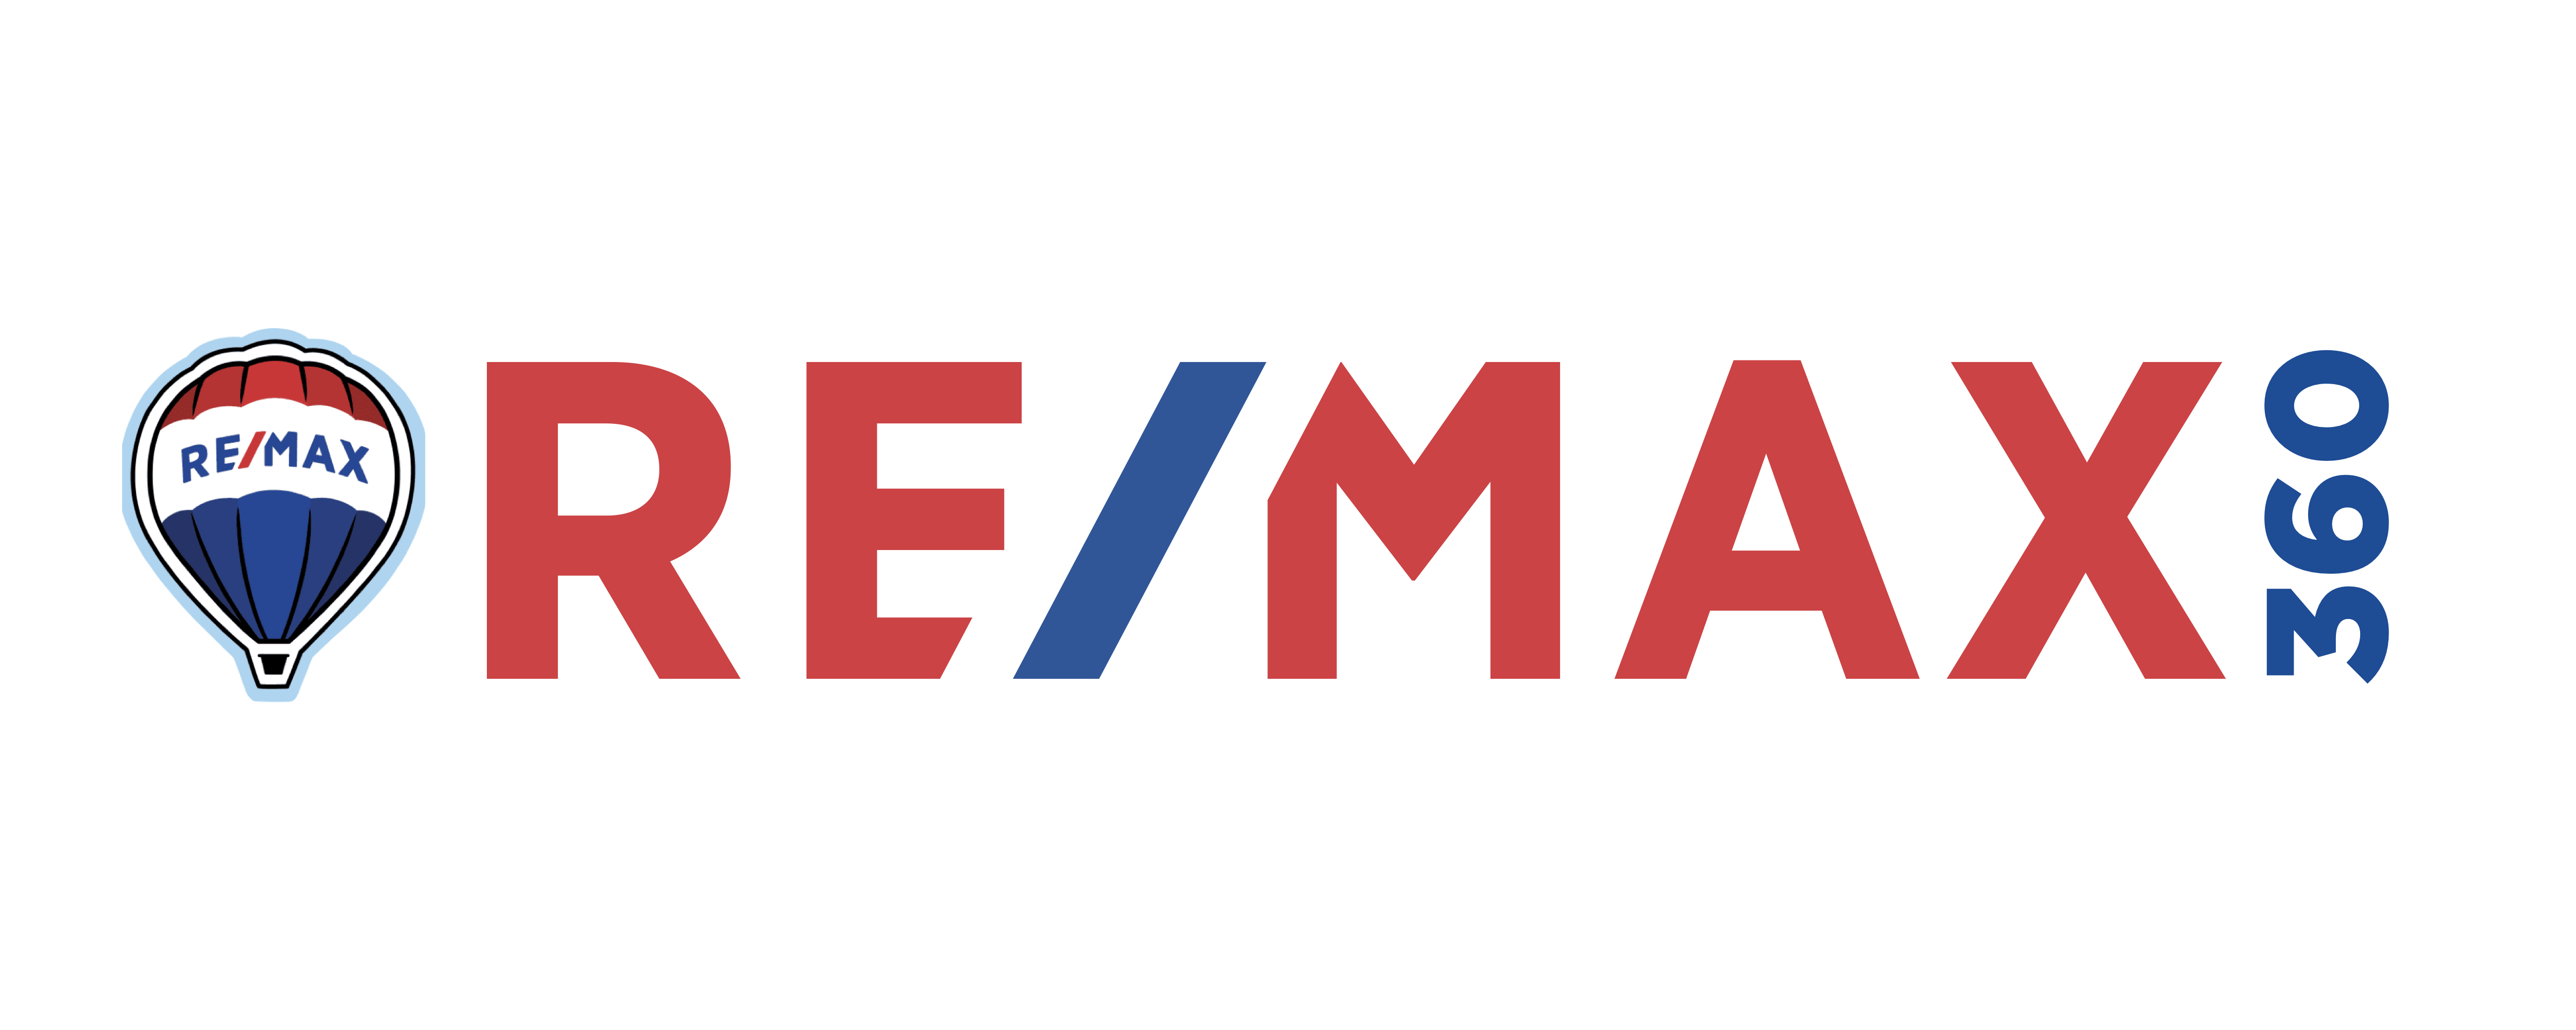 RE/MAX 360 balloon and word logo